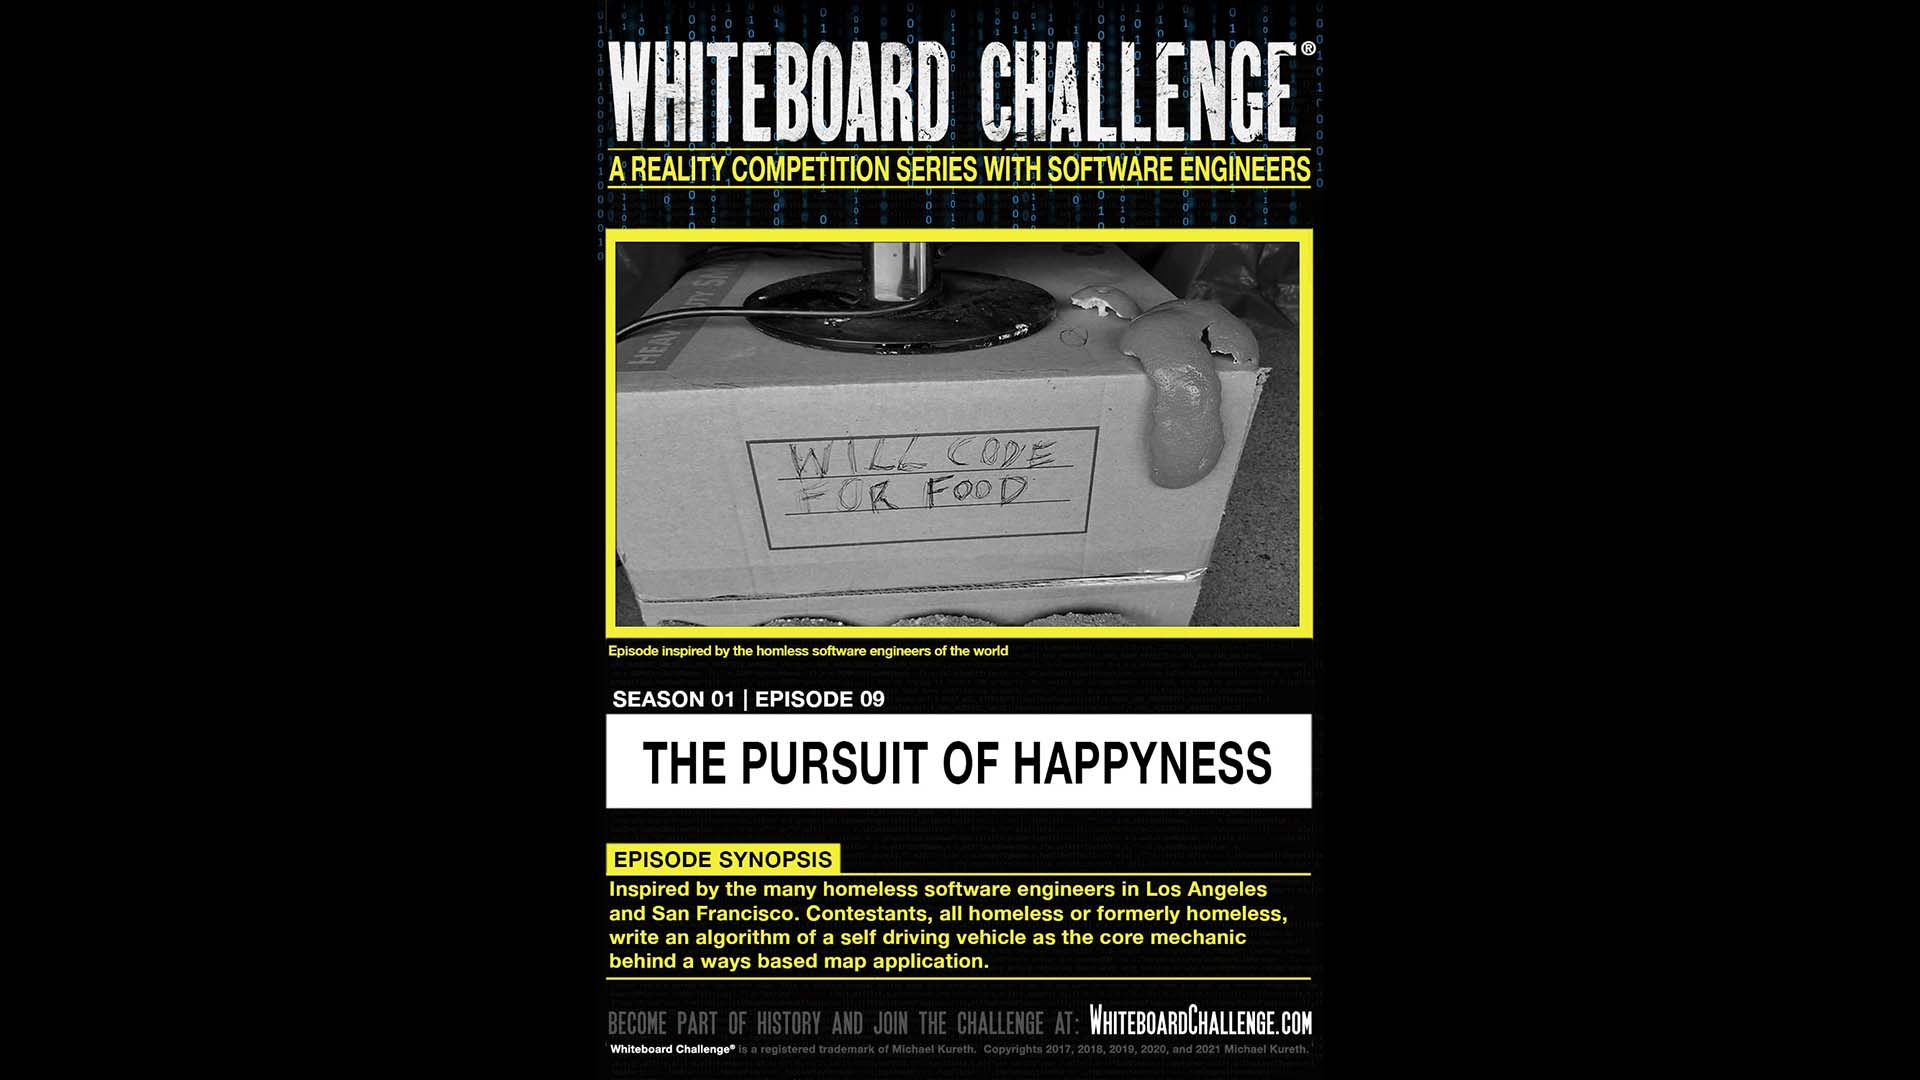 Whiteboard Challenge - The Pursuit of Happyness